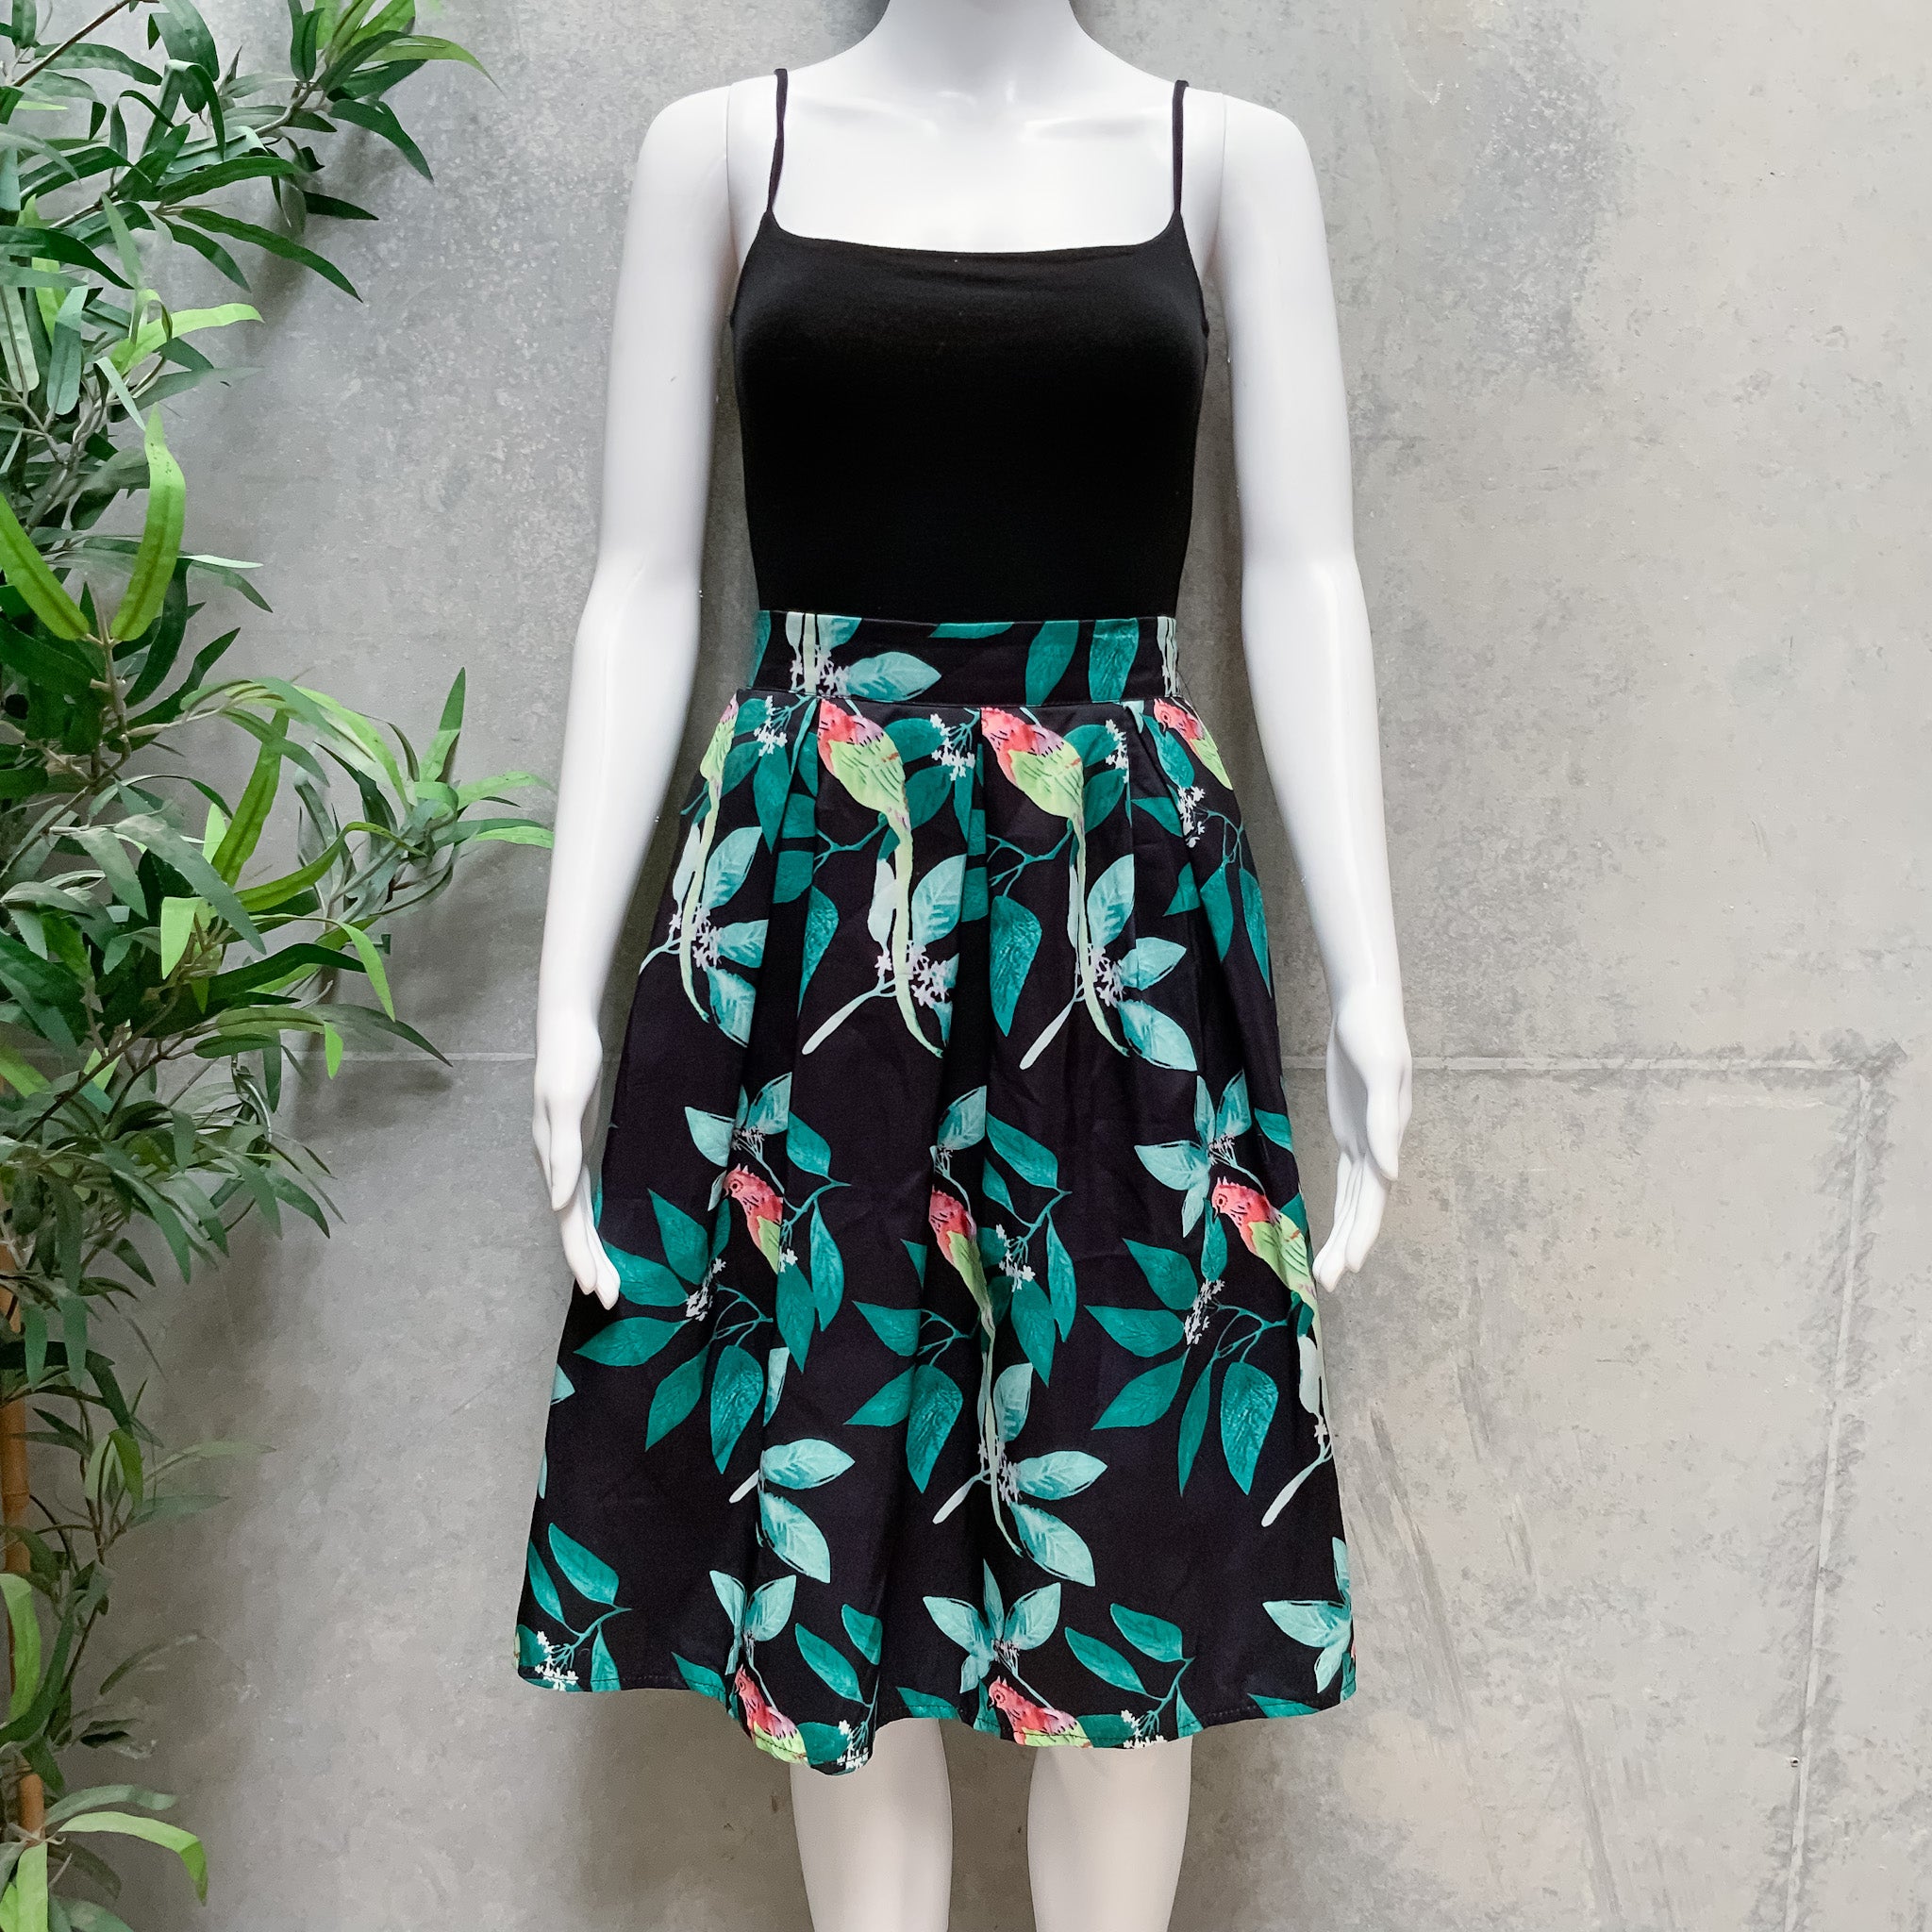 Womens Black Green Pleated A Line Floral Print A-Line Skirt - Size 6